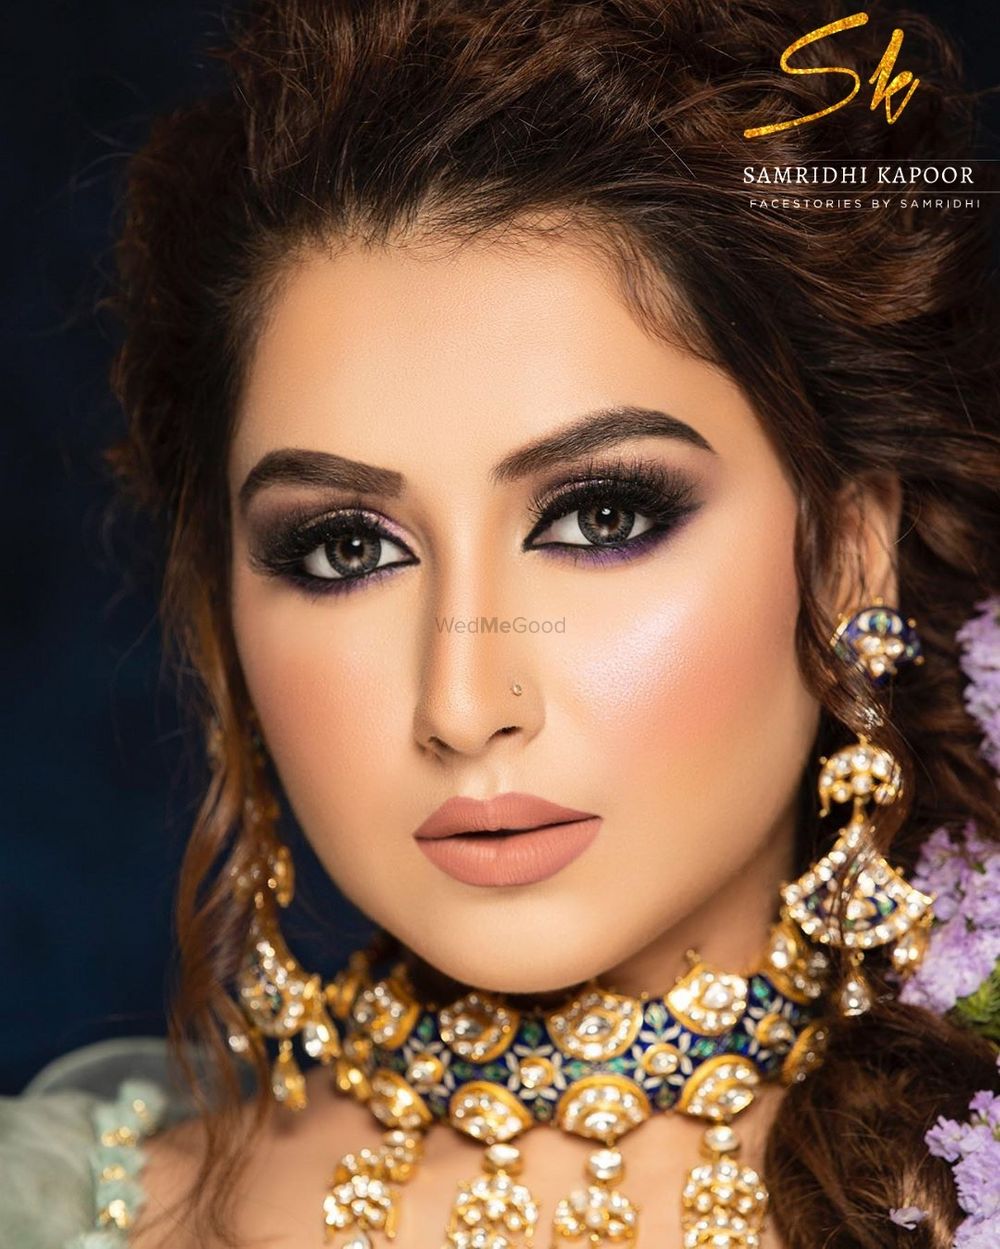 Photo From Airbrush Makeup - By Facestories by Samridhi